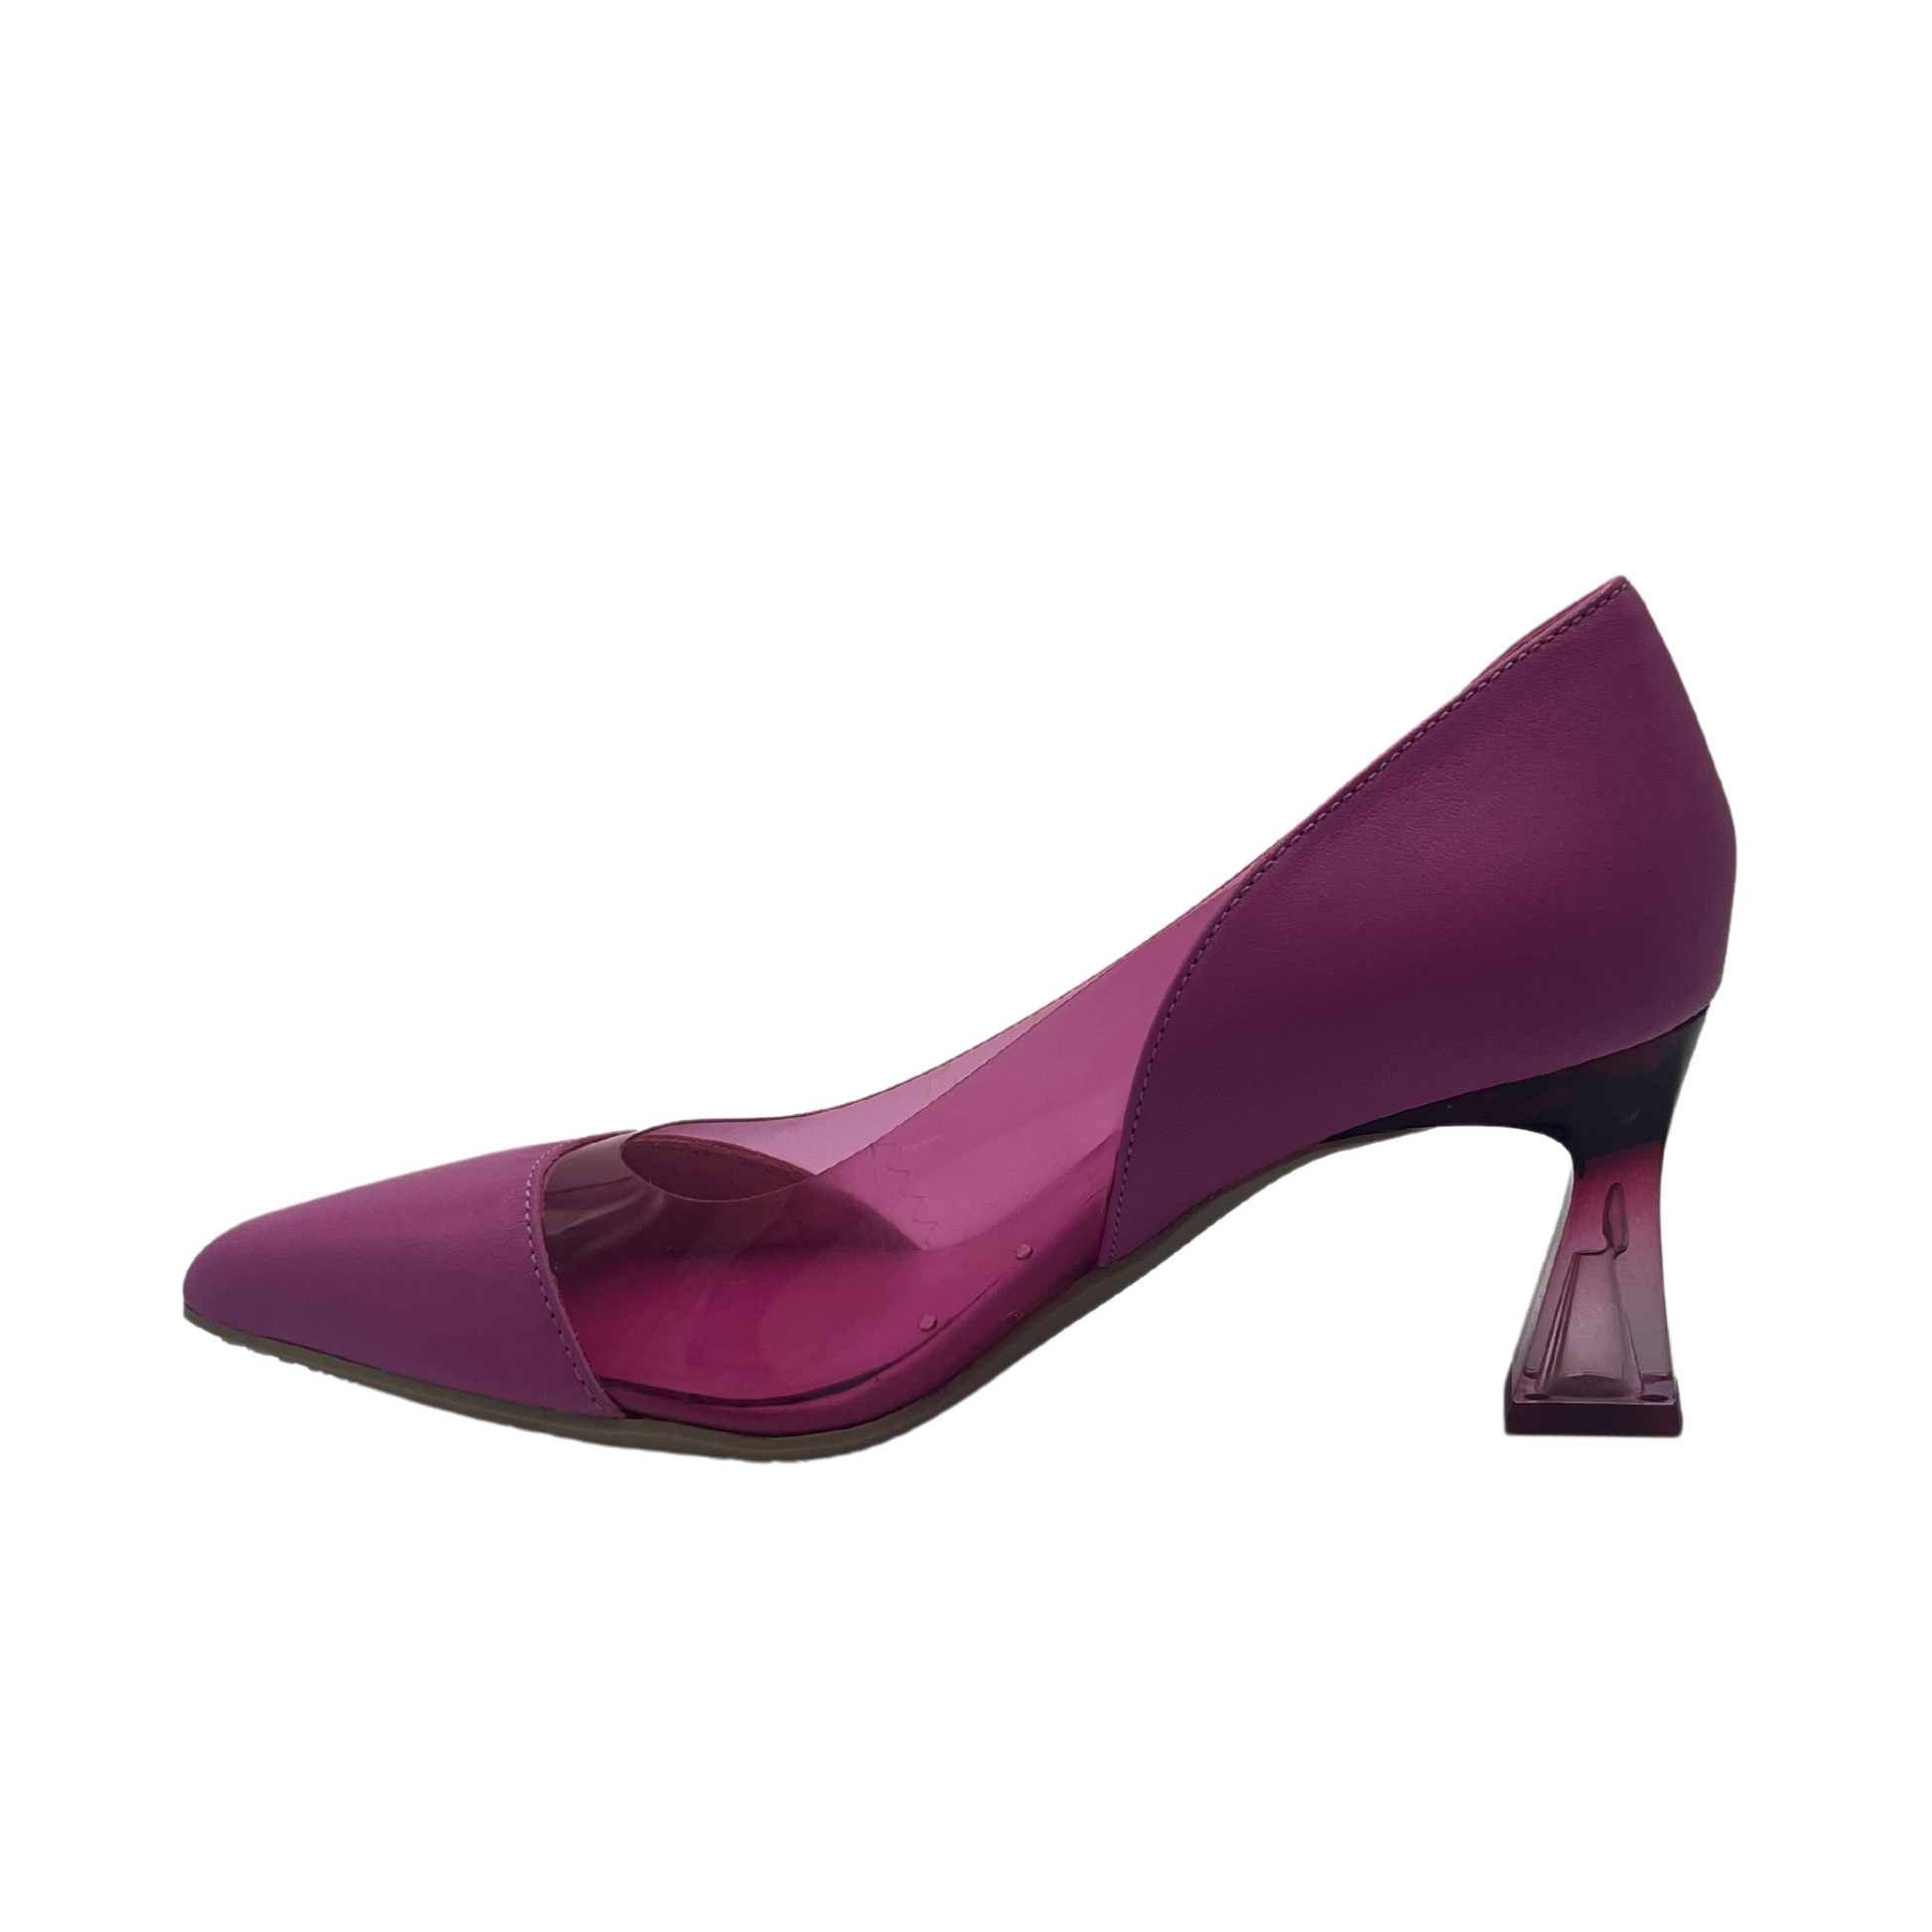 Left facing view of pink pointed toe pump with flared lucite heel